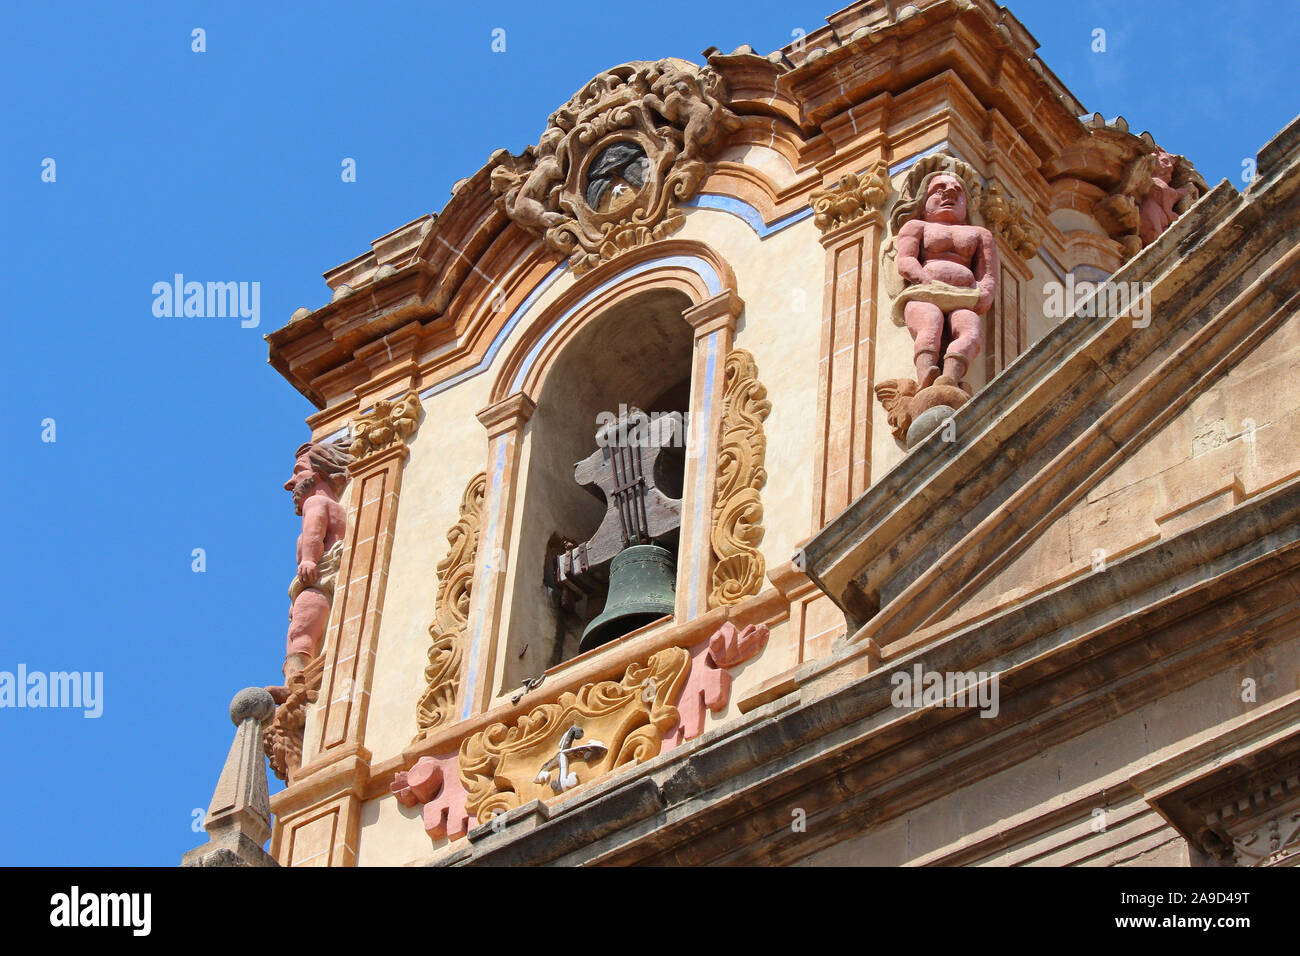 The baroque bell tower of the Old University, Orihuela. Originally the building was a Dominican convent but in 1564 it became a university until 1824. Stock Photo